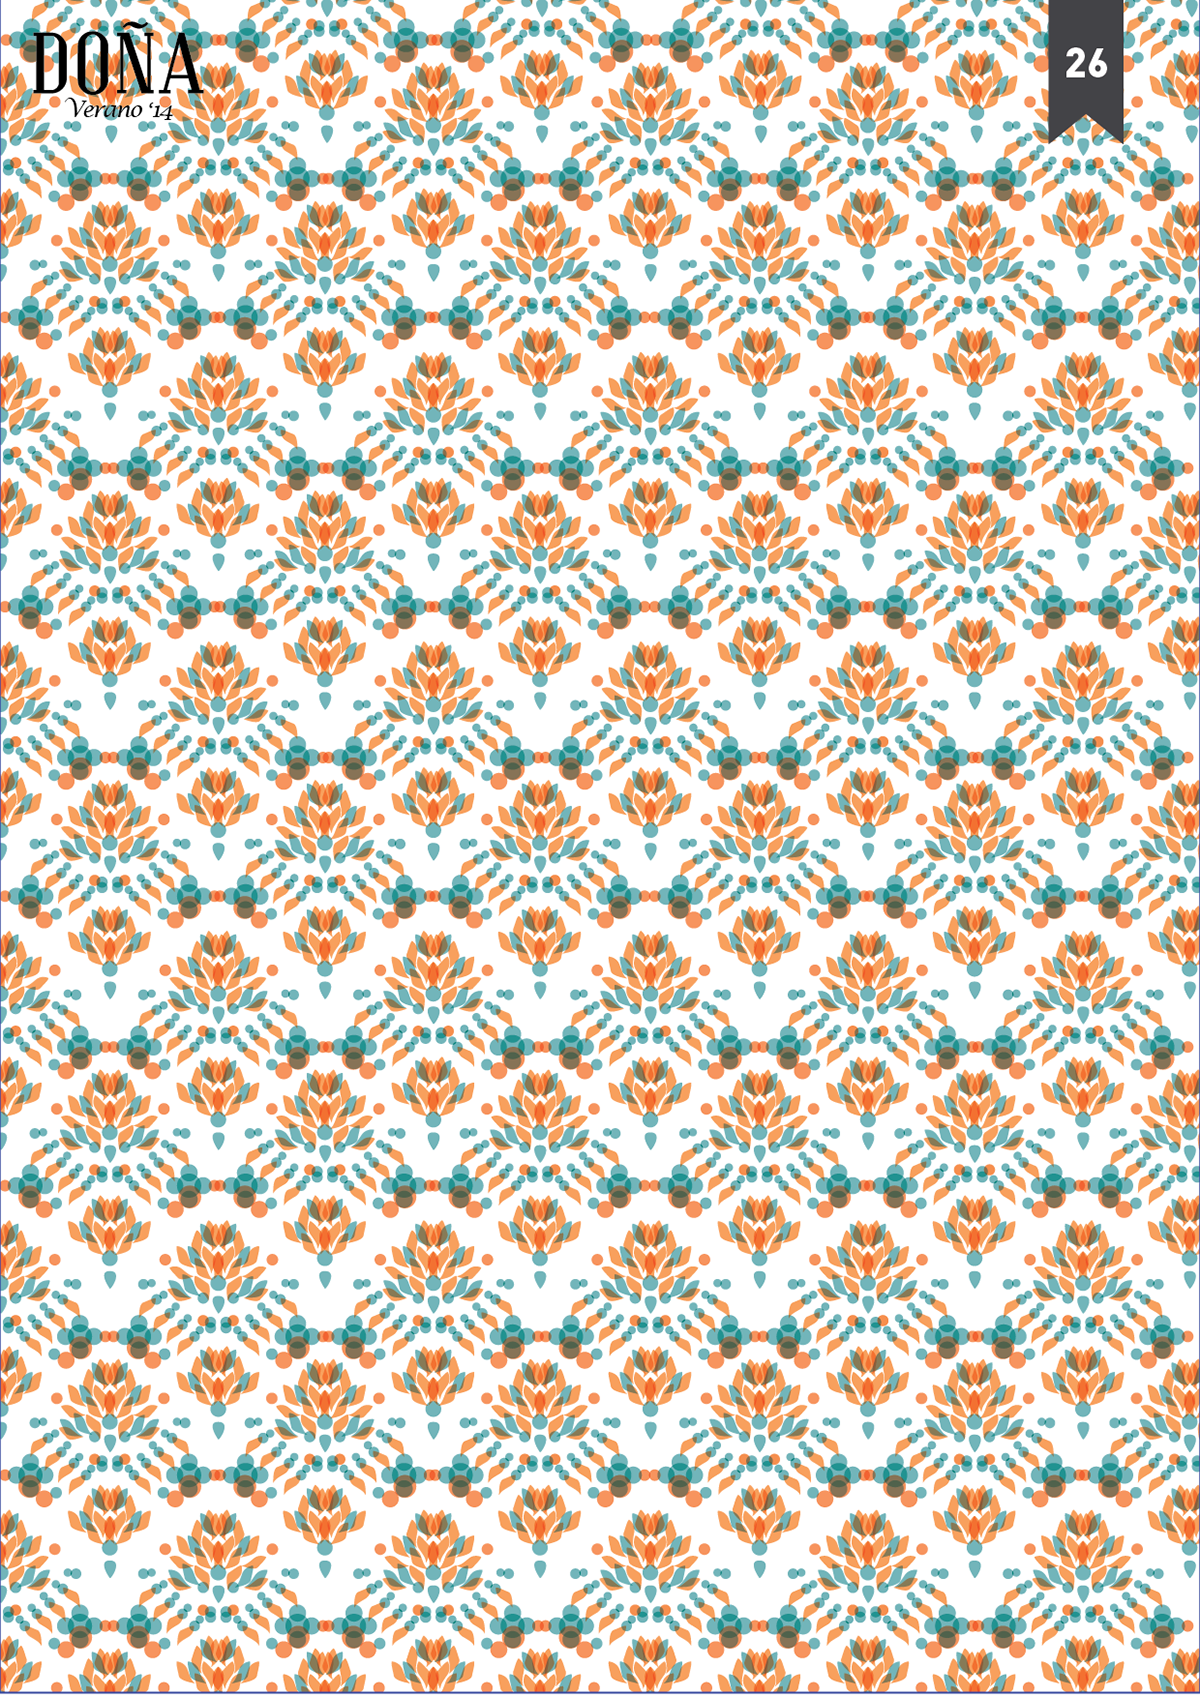 pattern design print Flowers Mandalas stripes dots art drawings Repetition Like color handdrawing giftwrapping